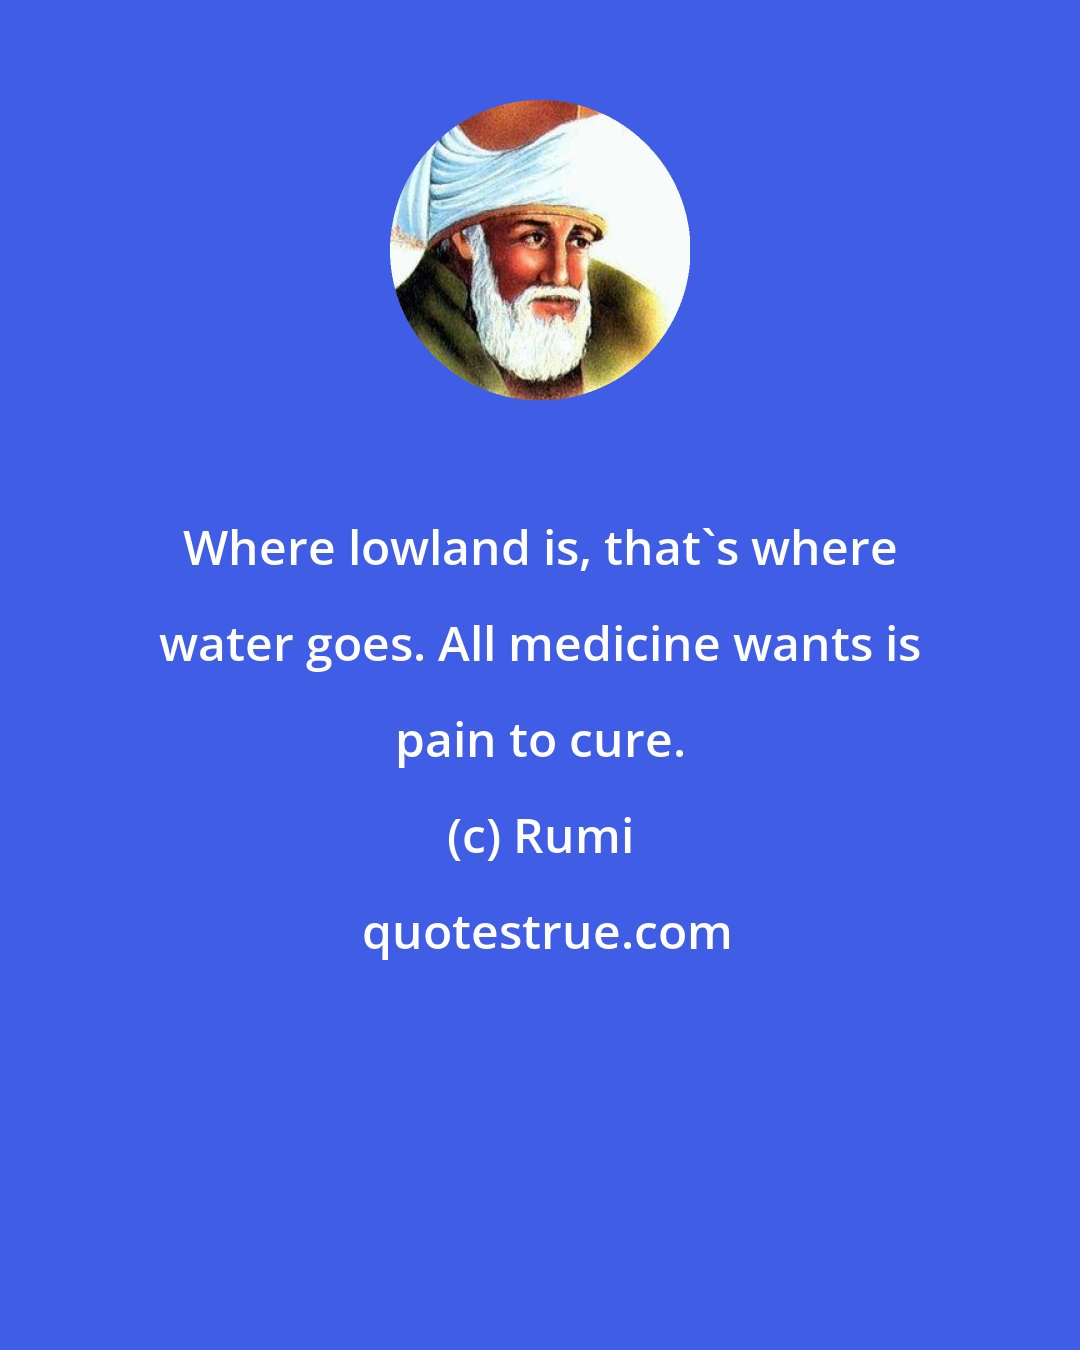 Rumi: Where lowland is, that's where water goes. All medicine wants is pain to cure.